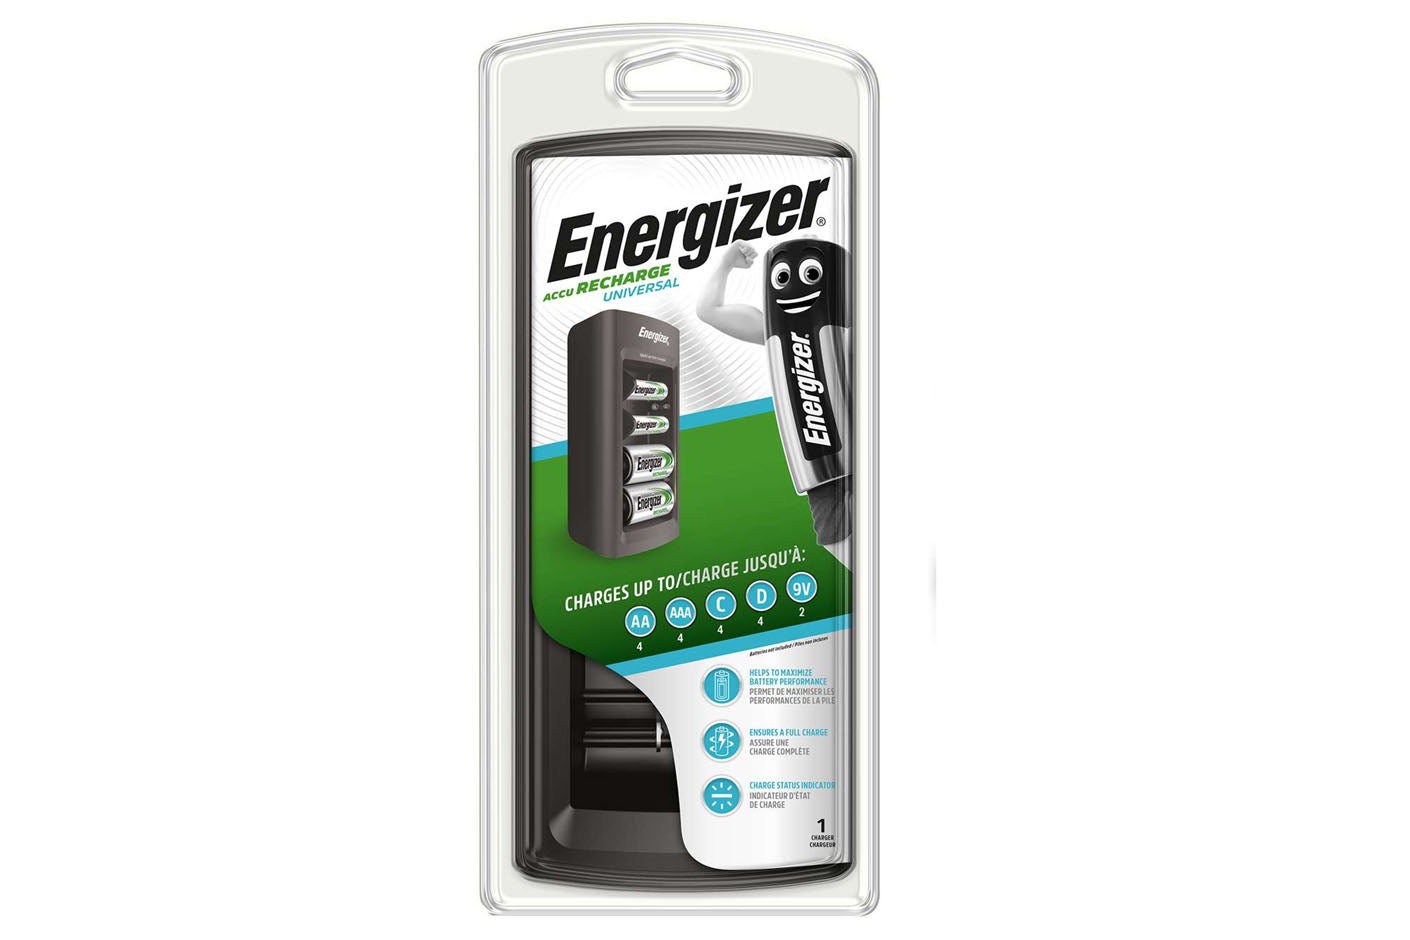 Energizer Universal Charger for AA / AAA / C / D / 9V Rechargeable Batteries